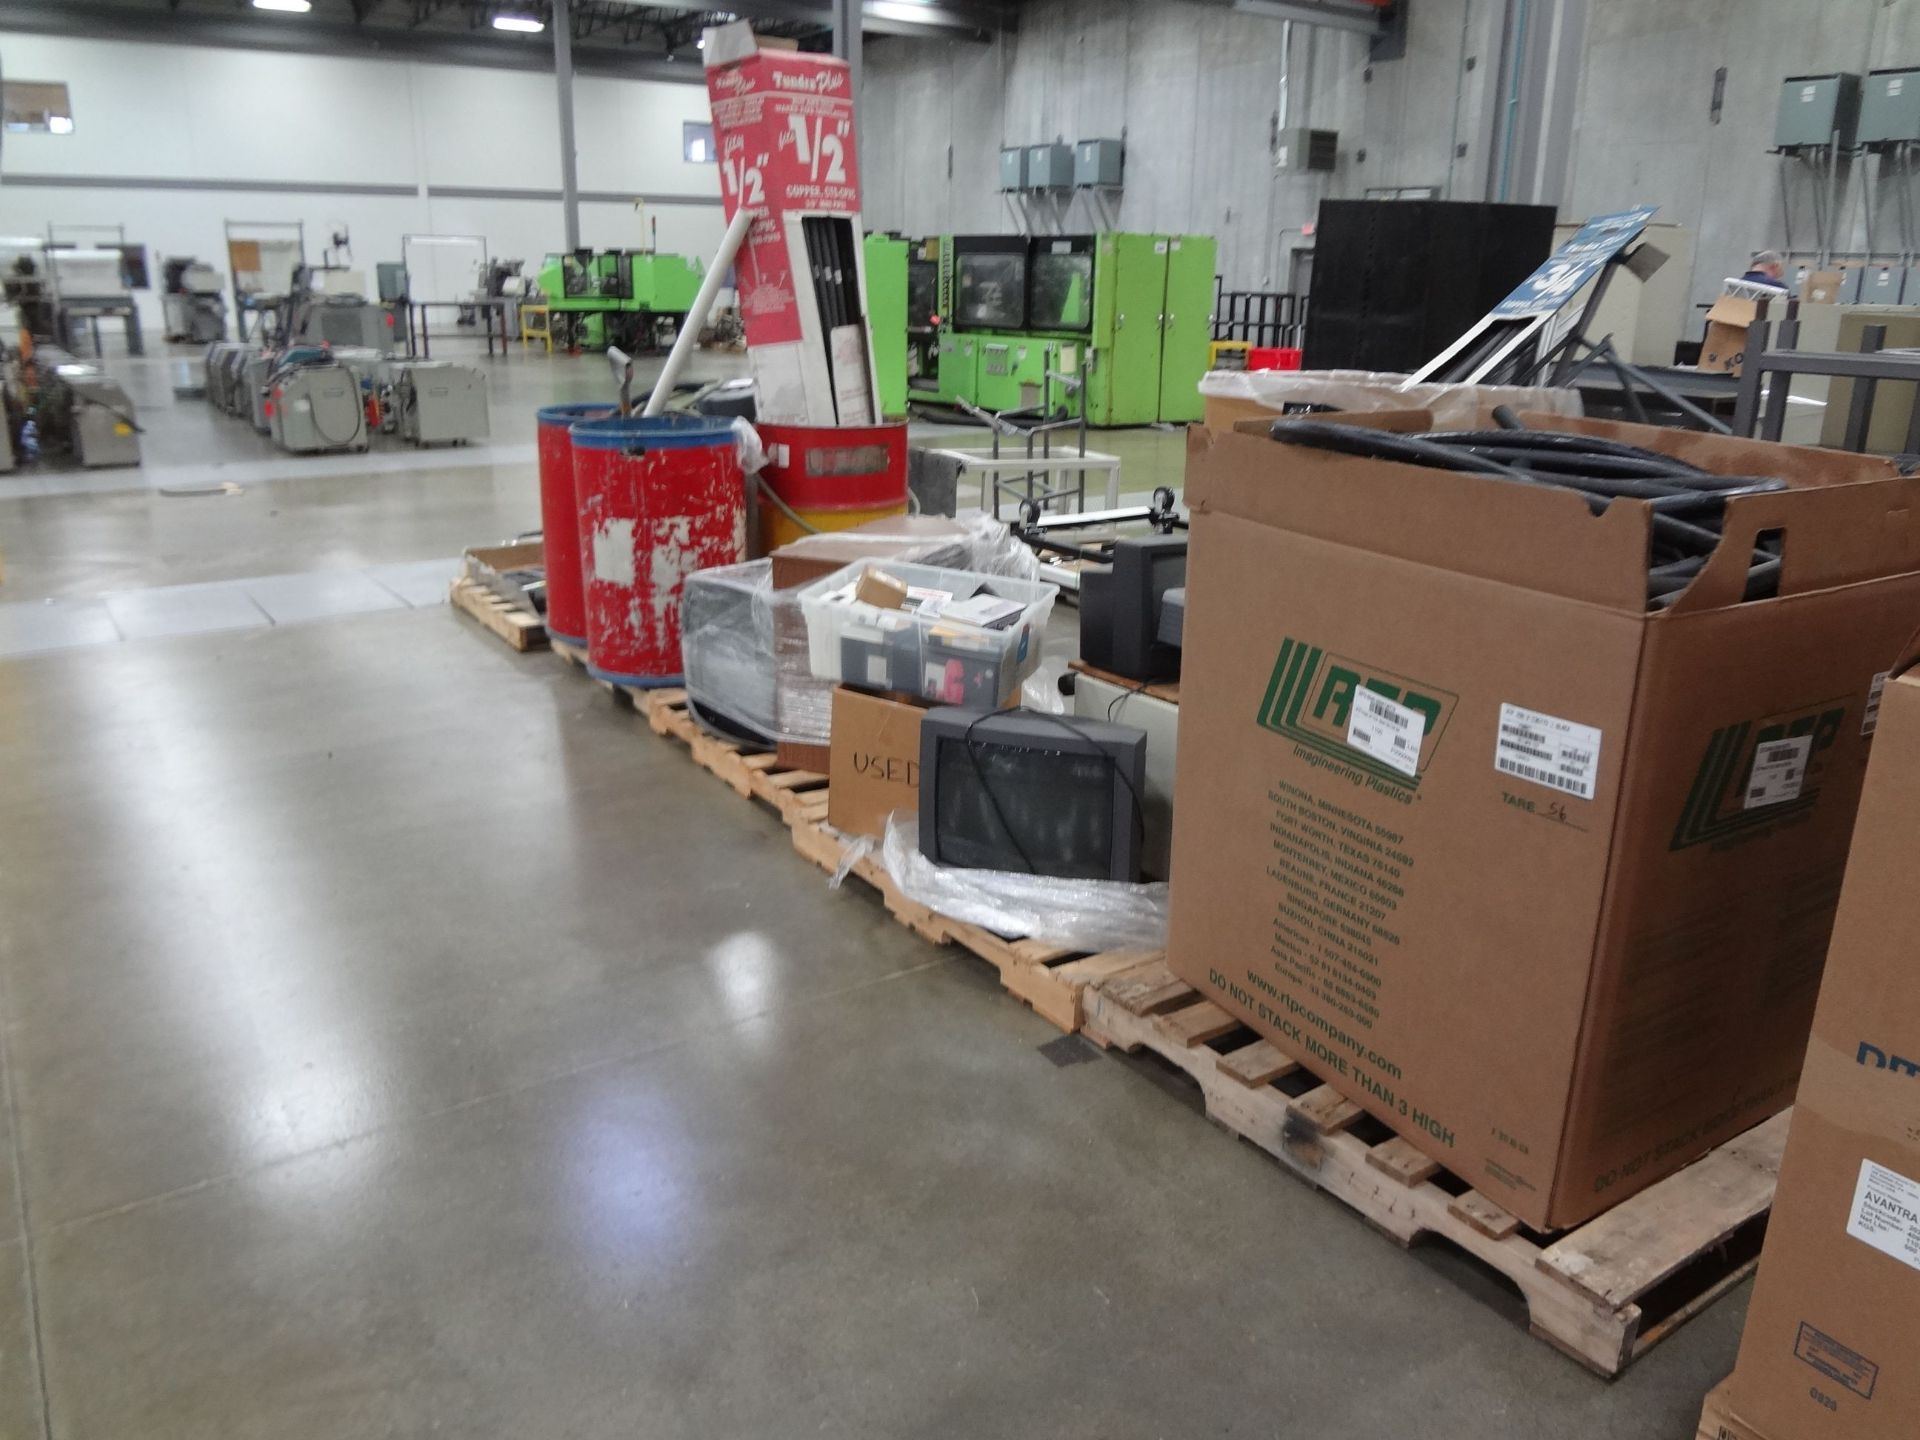 (LOT) (9) PALLETS MISCELLANEOUS EQUIPMENT INCLUDING HOSE, AV EQUIPMENT AND CONVEYOR PARTS - Image 3 of 3